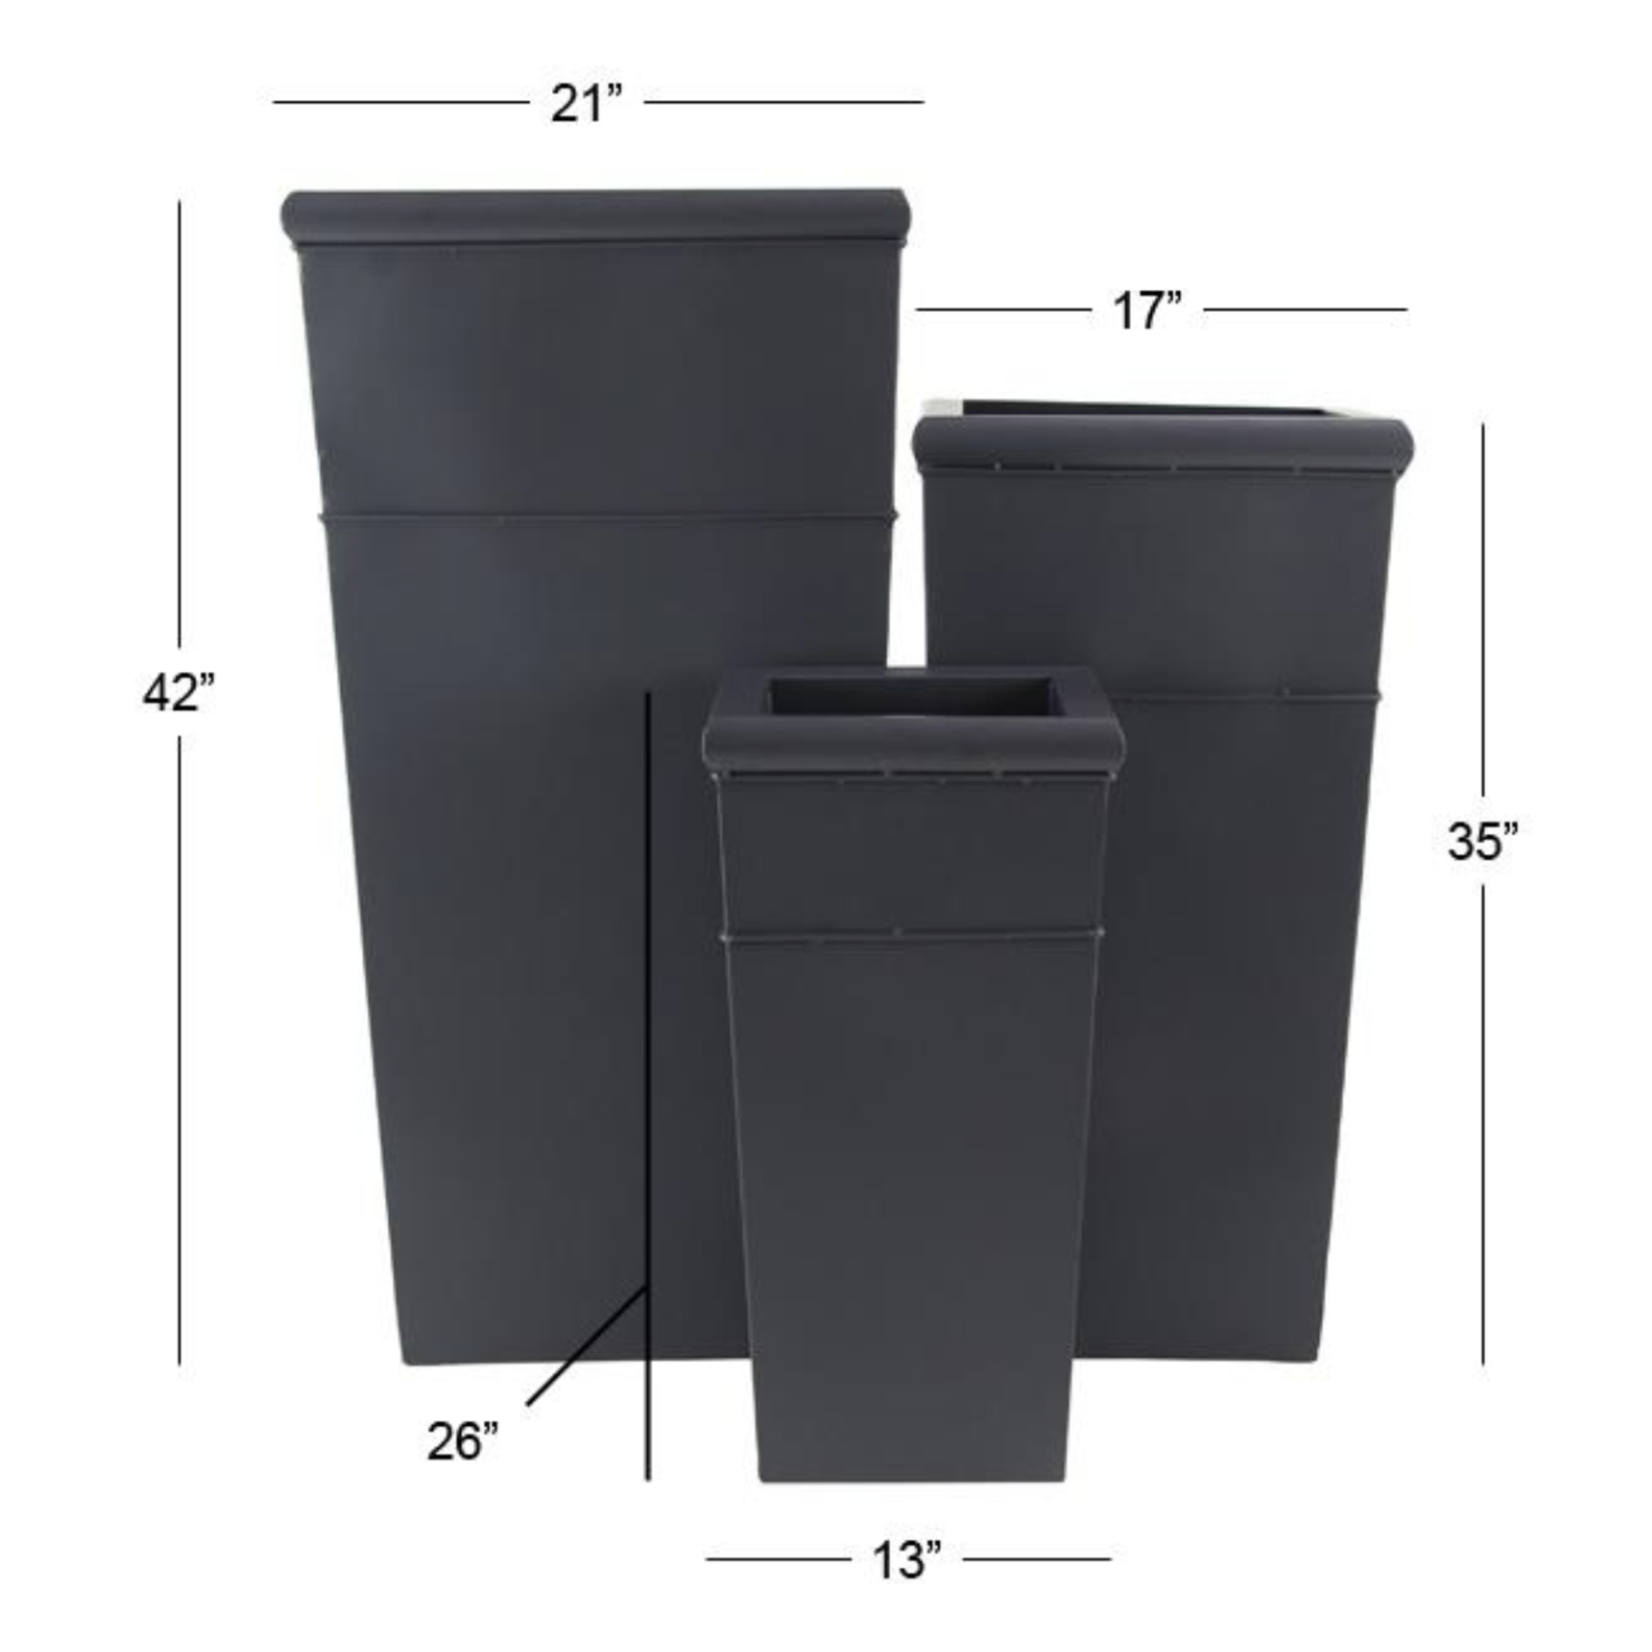 26”H X 13” X 13” SMALL GREY TIN TRADITIONAL PLANTER (NOT WATER TIGHT, PRICE PER SIZE, BOX HAS ASSORTMENT)